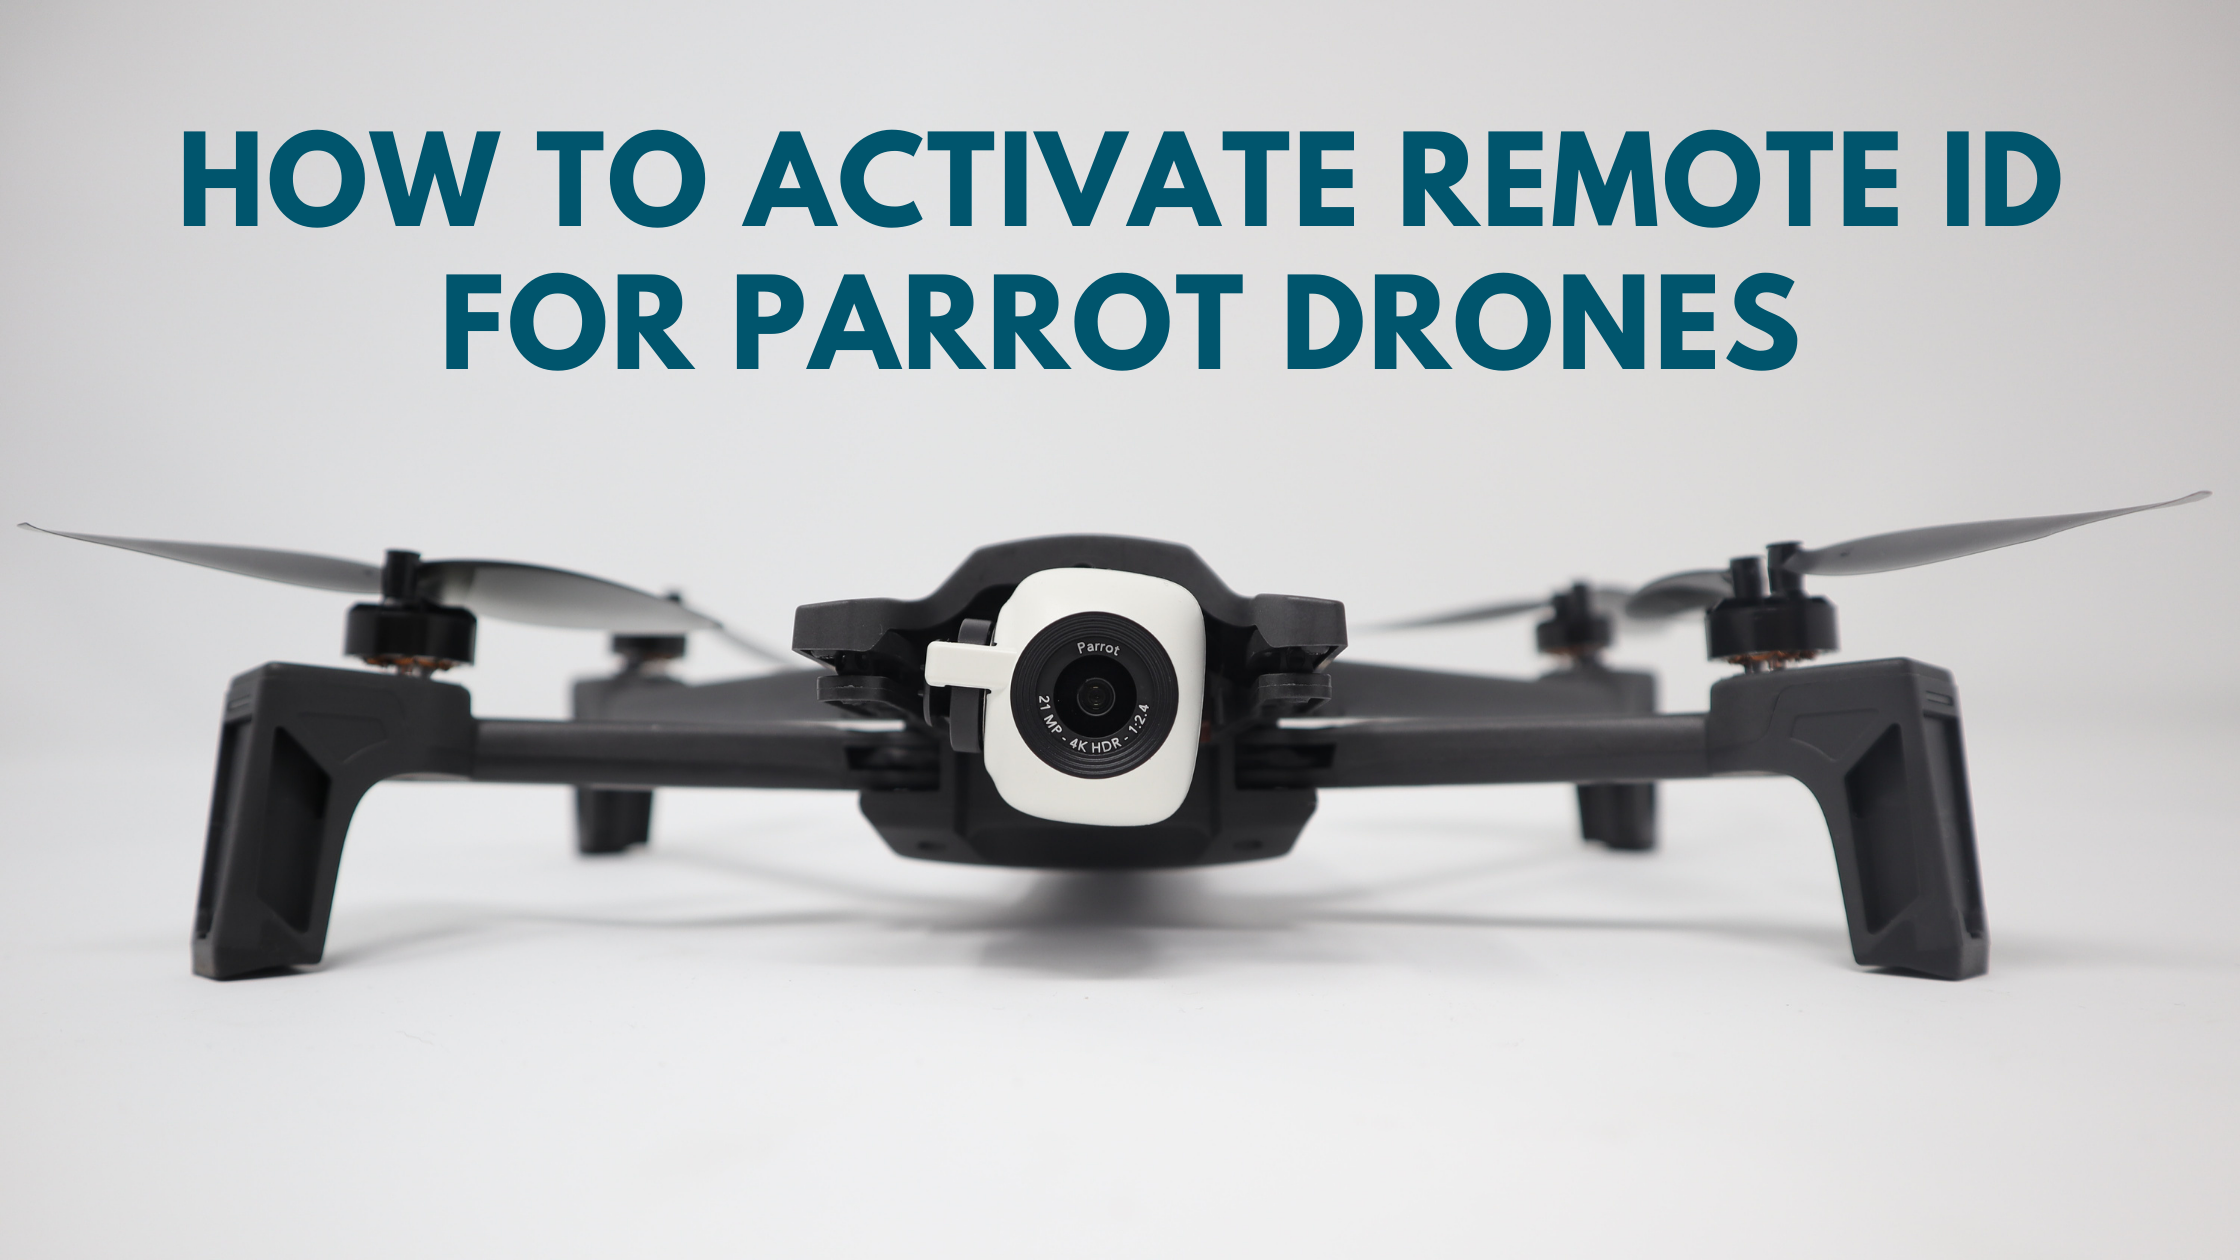 Activate Remote ID for Parrot brand drones